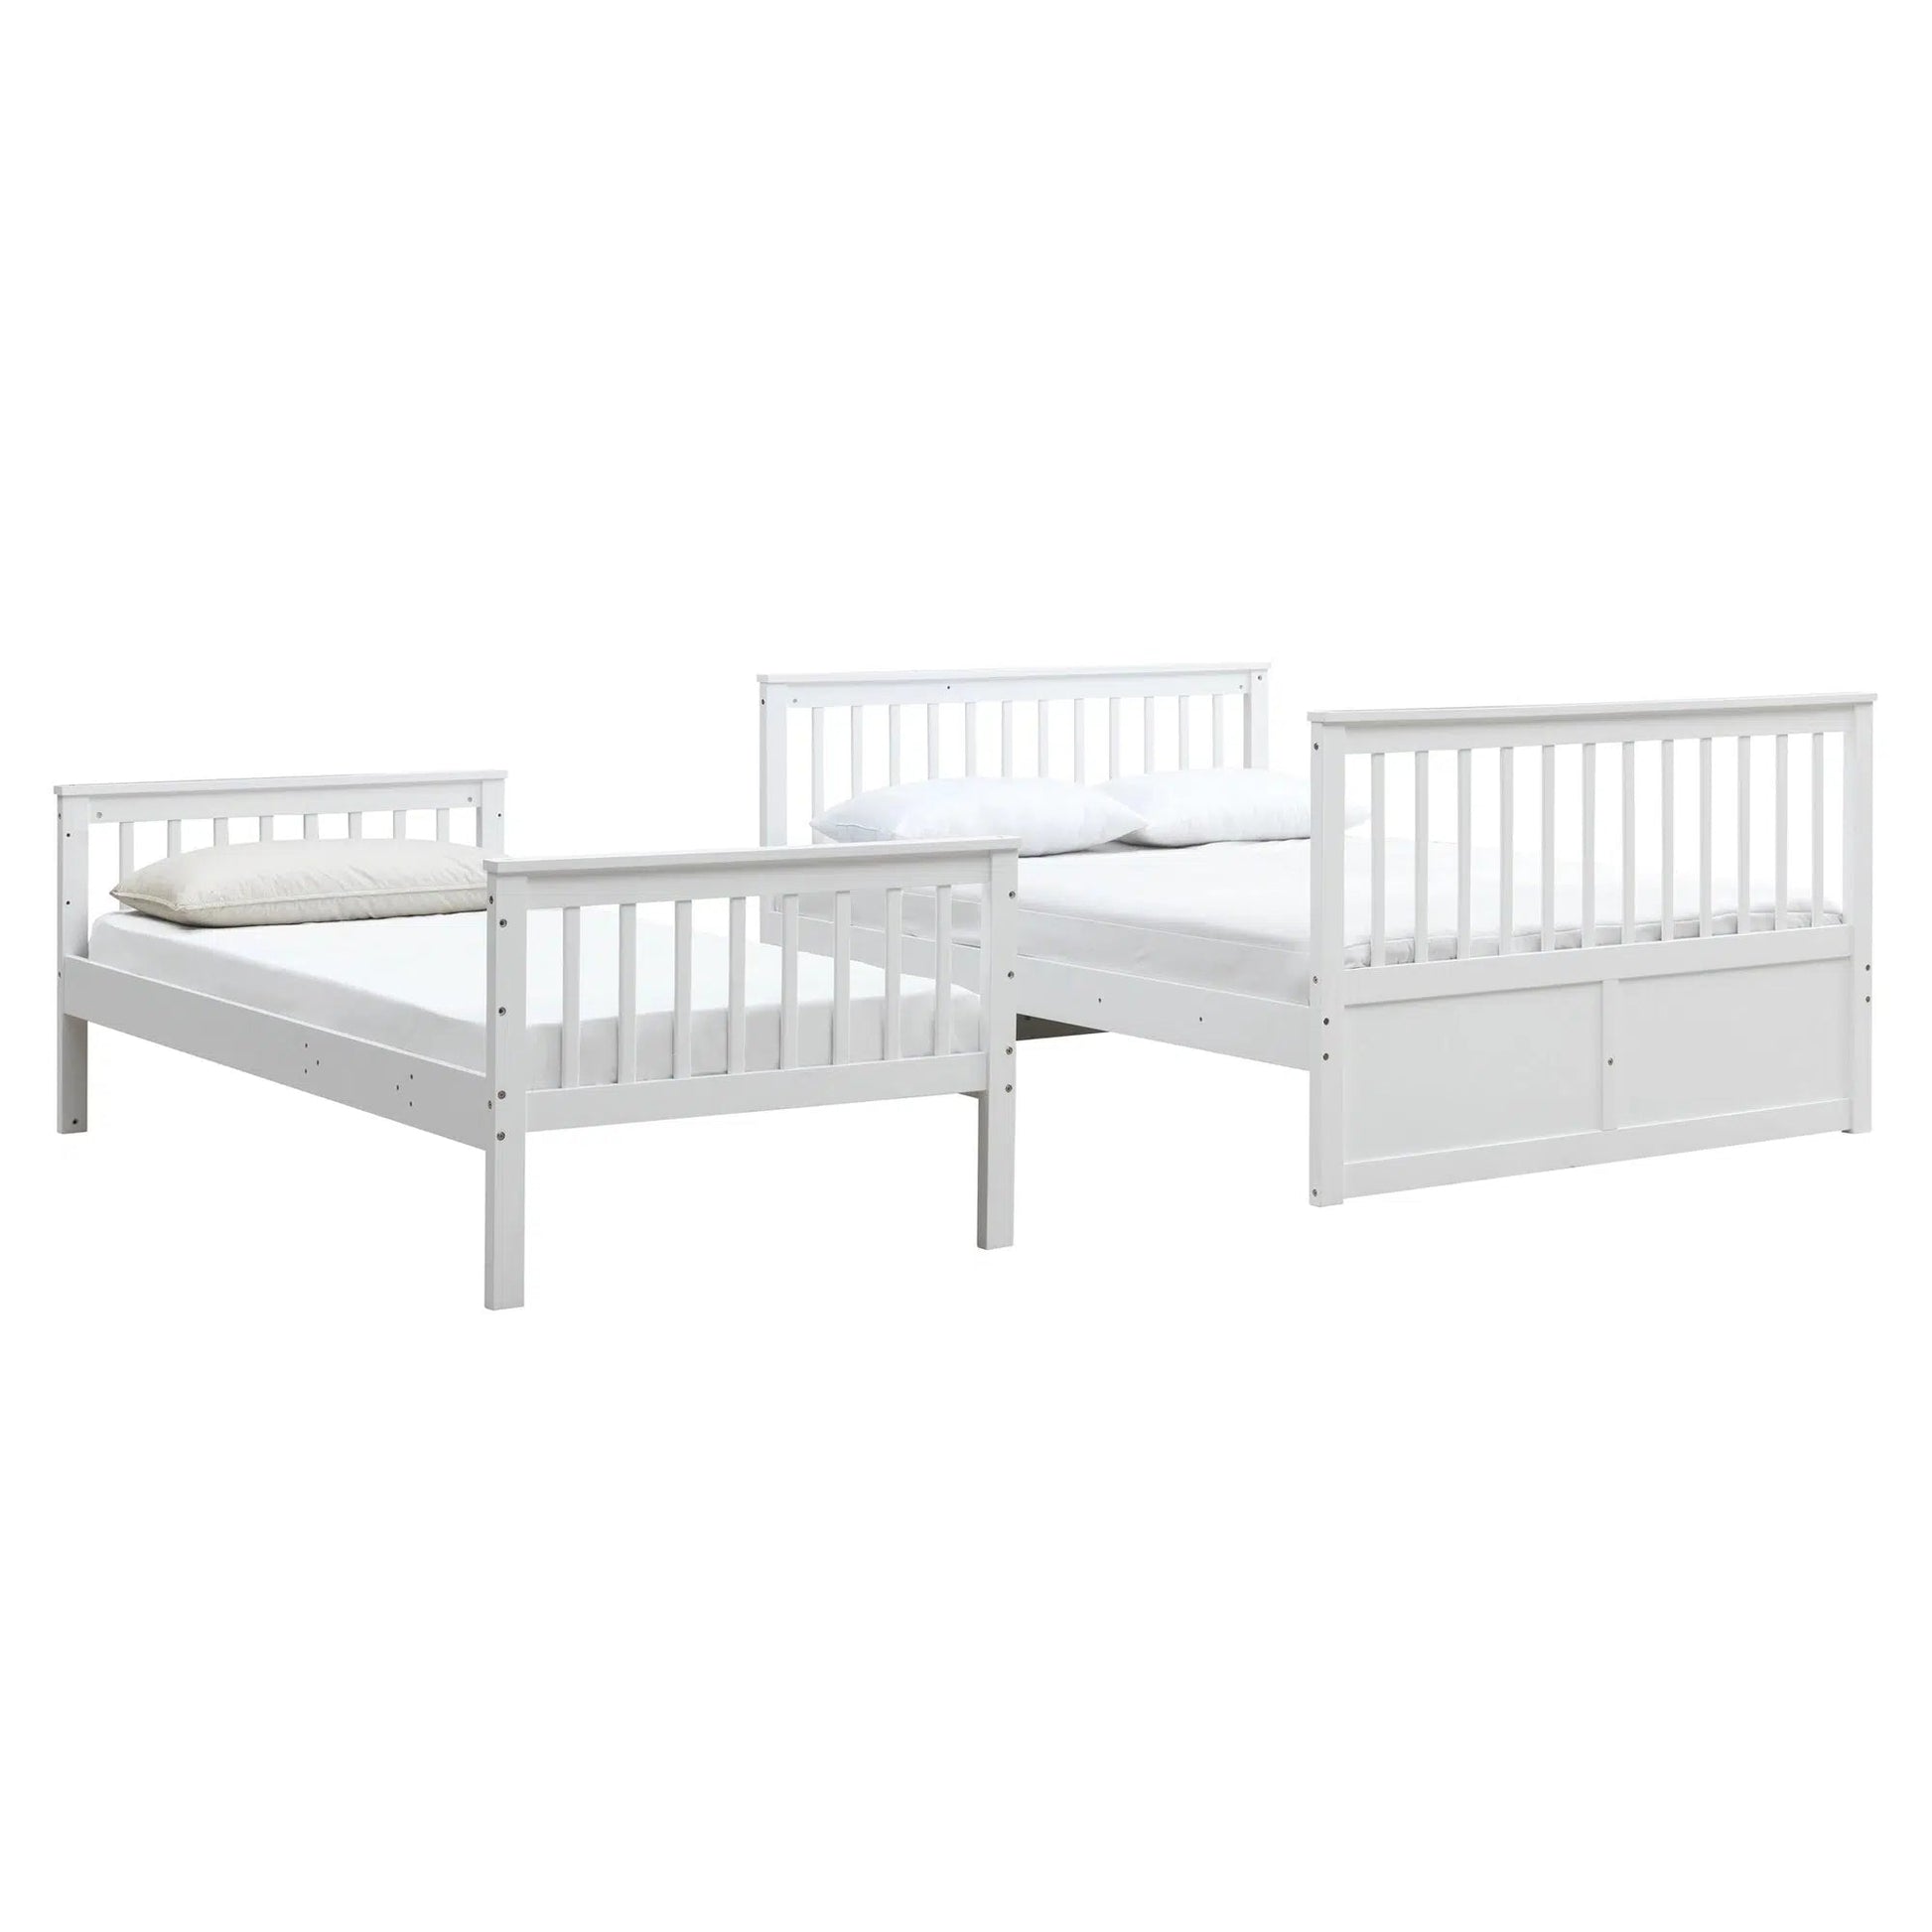 Seattle Single over Double Timber Bunk Bed in White-Sleep Doctor